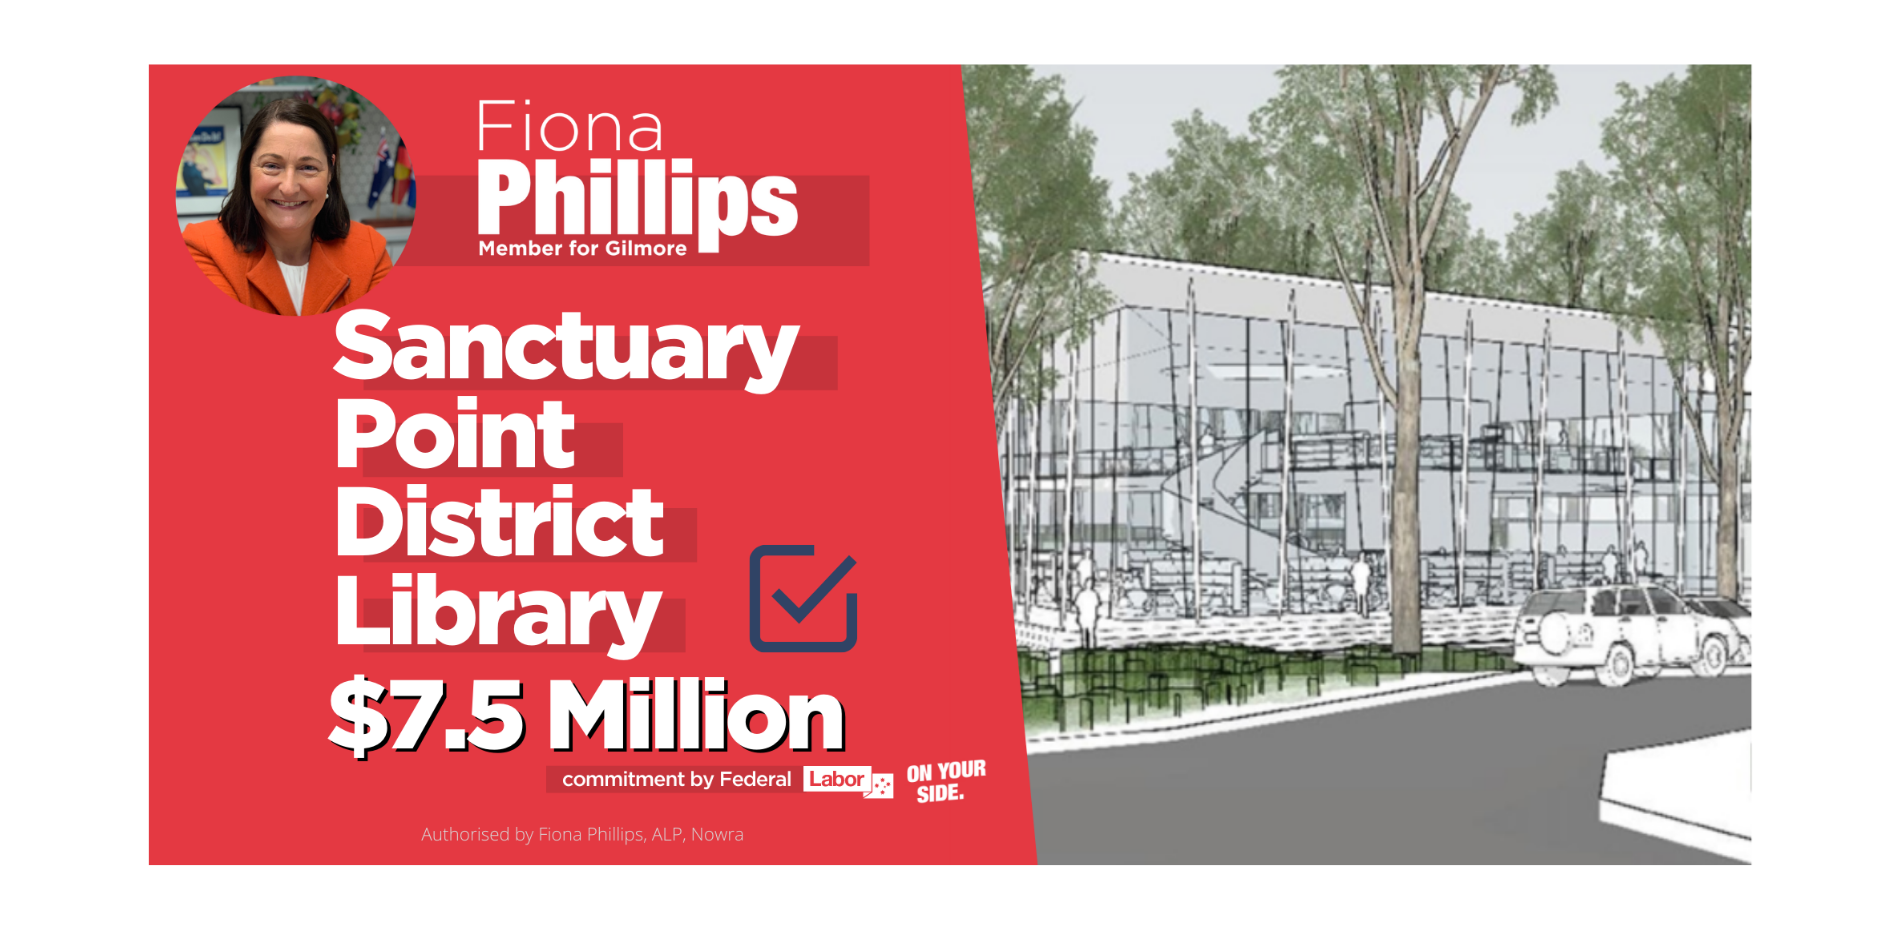 Media Release | Labor commits $7.5M toward Sanctuary Point District Library Main Image